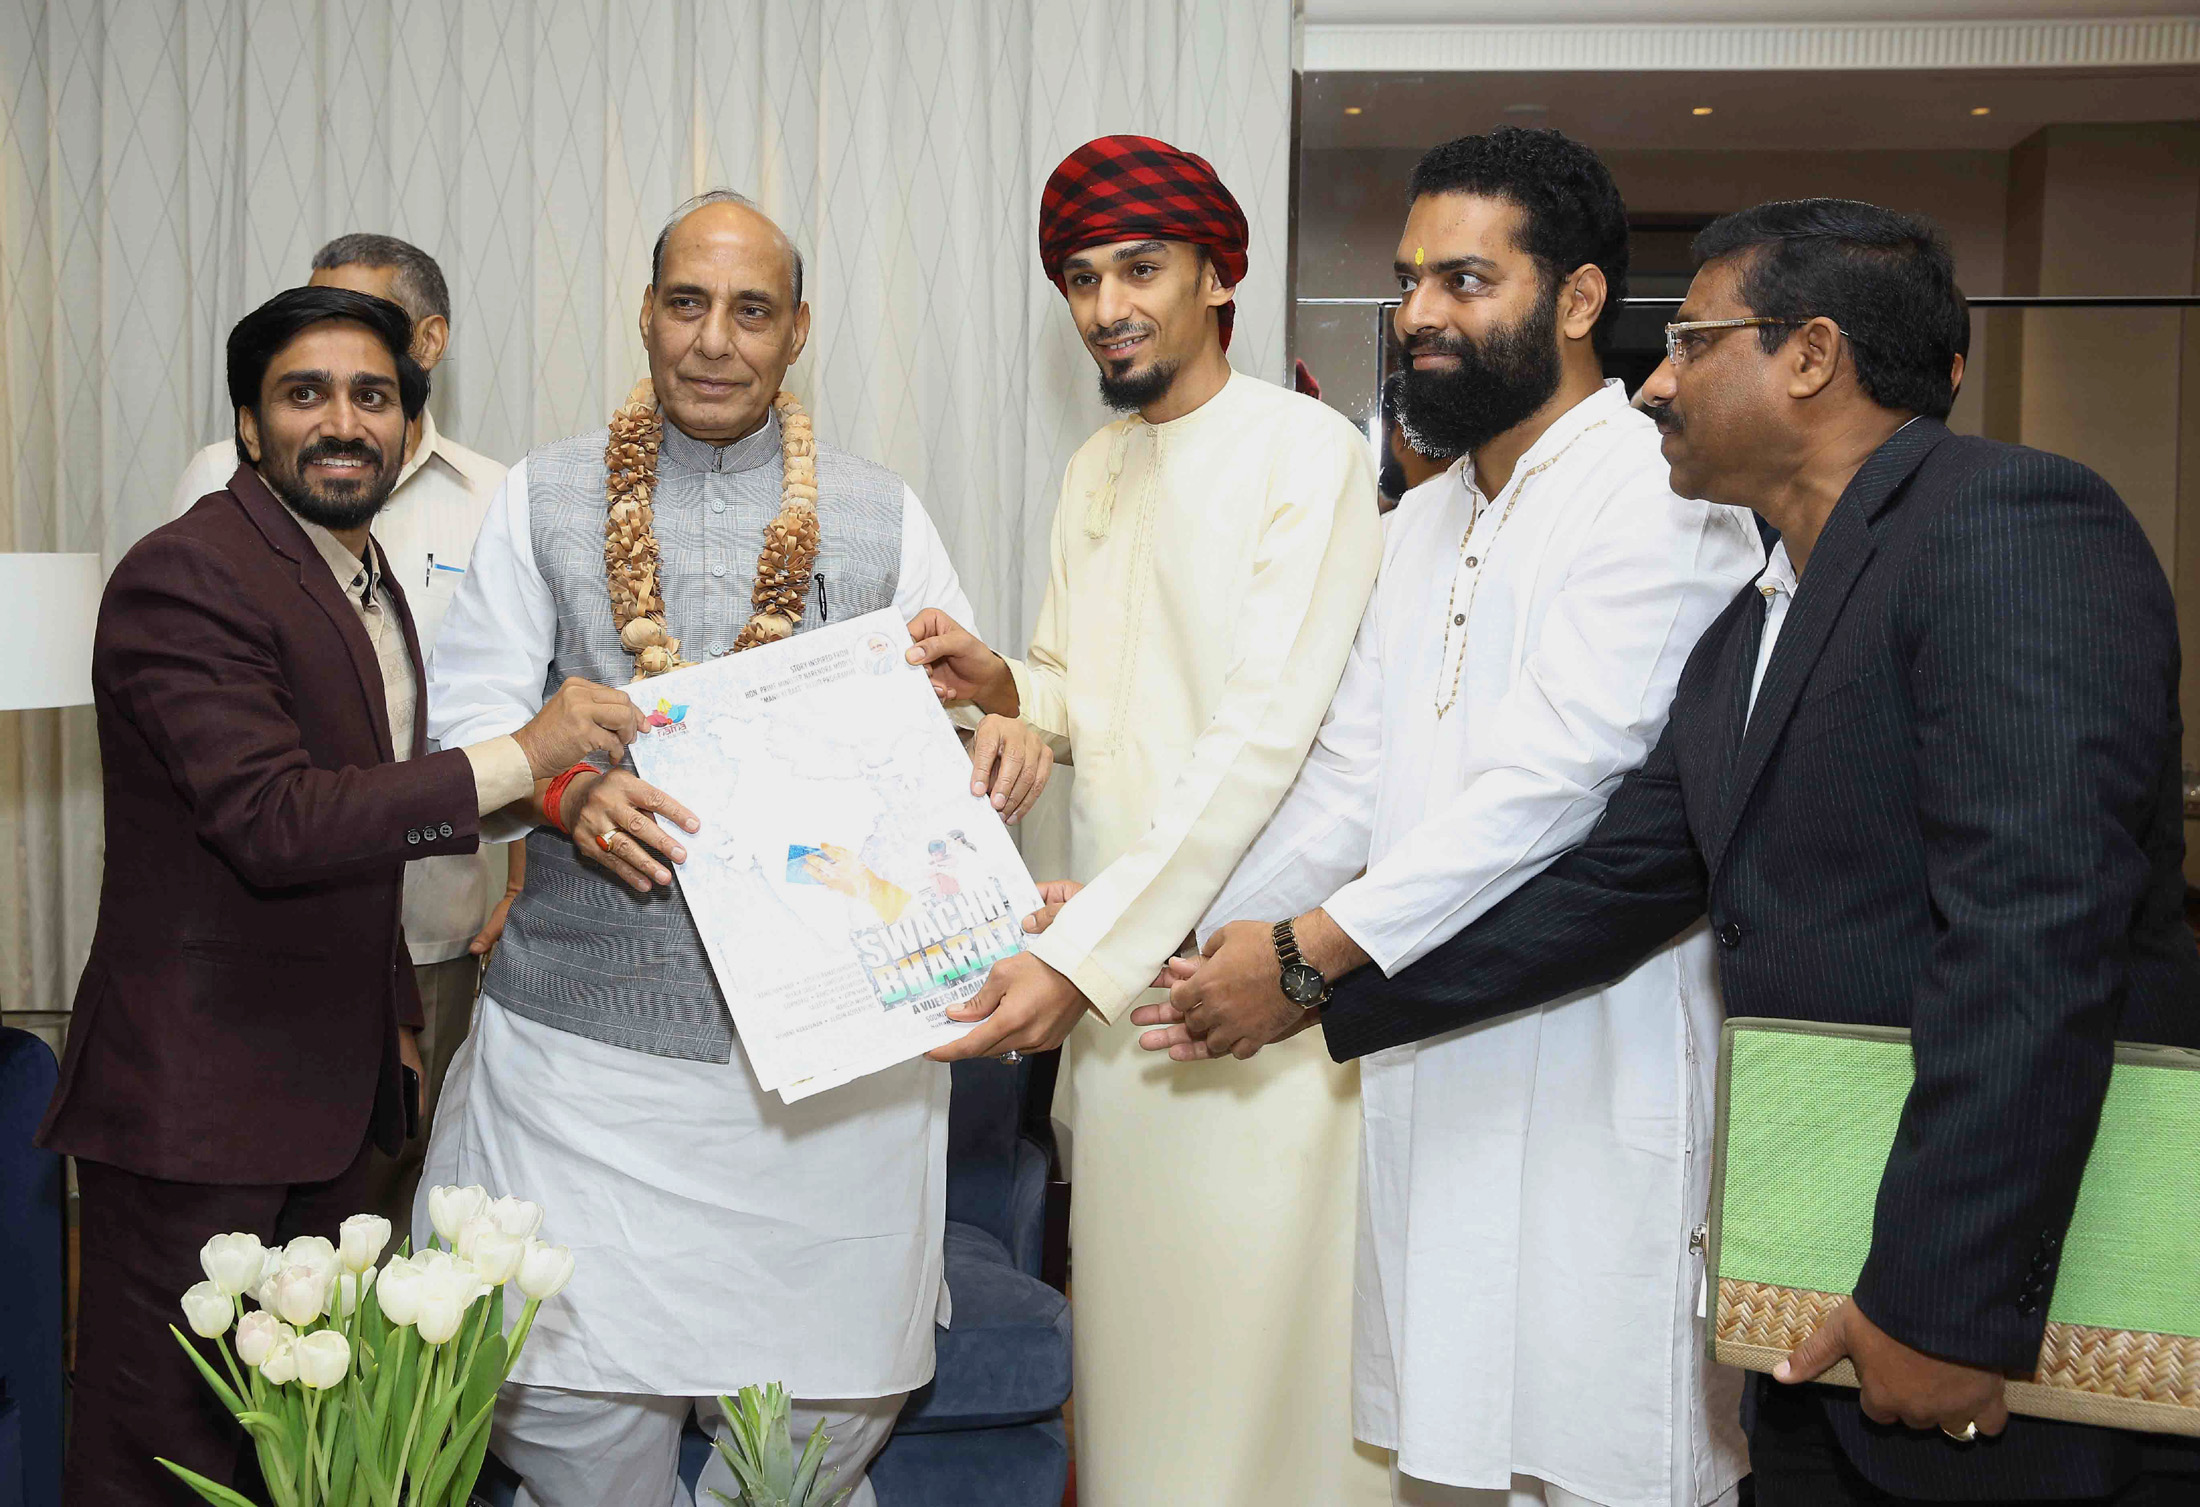 A delegation of Indian community in Bahrain, calling on the Union Home Minister, Shri Rajnath Singh, in Manama on October 25, 2016.